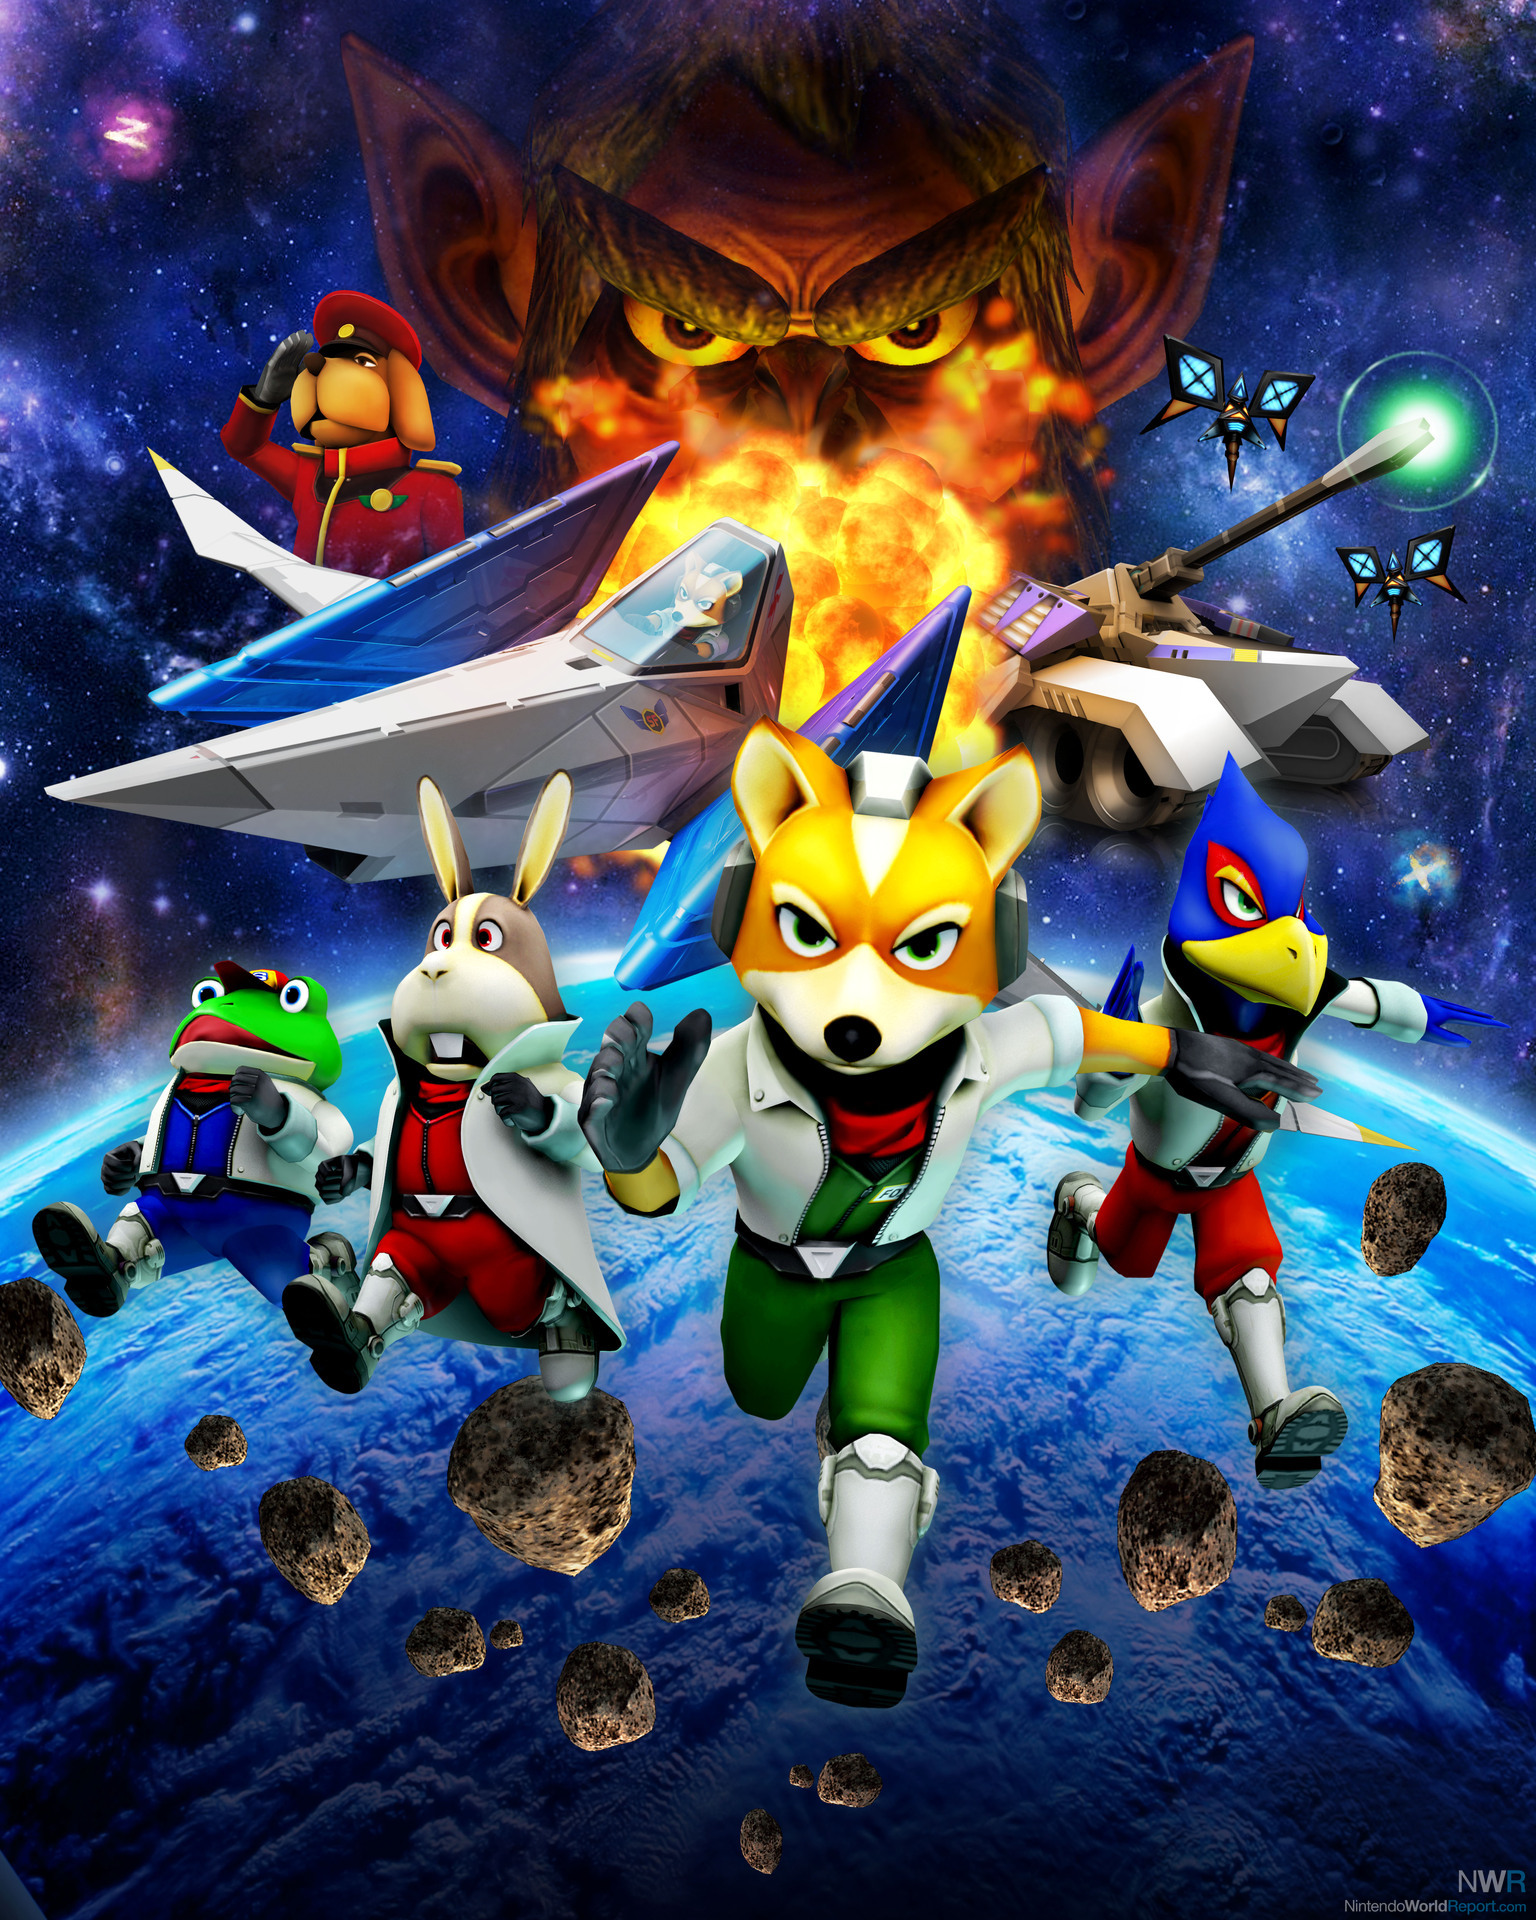 when did star fox 64 come out